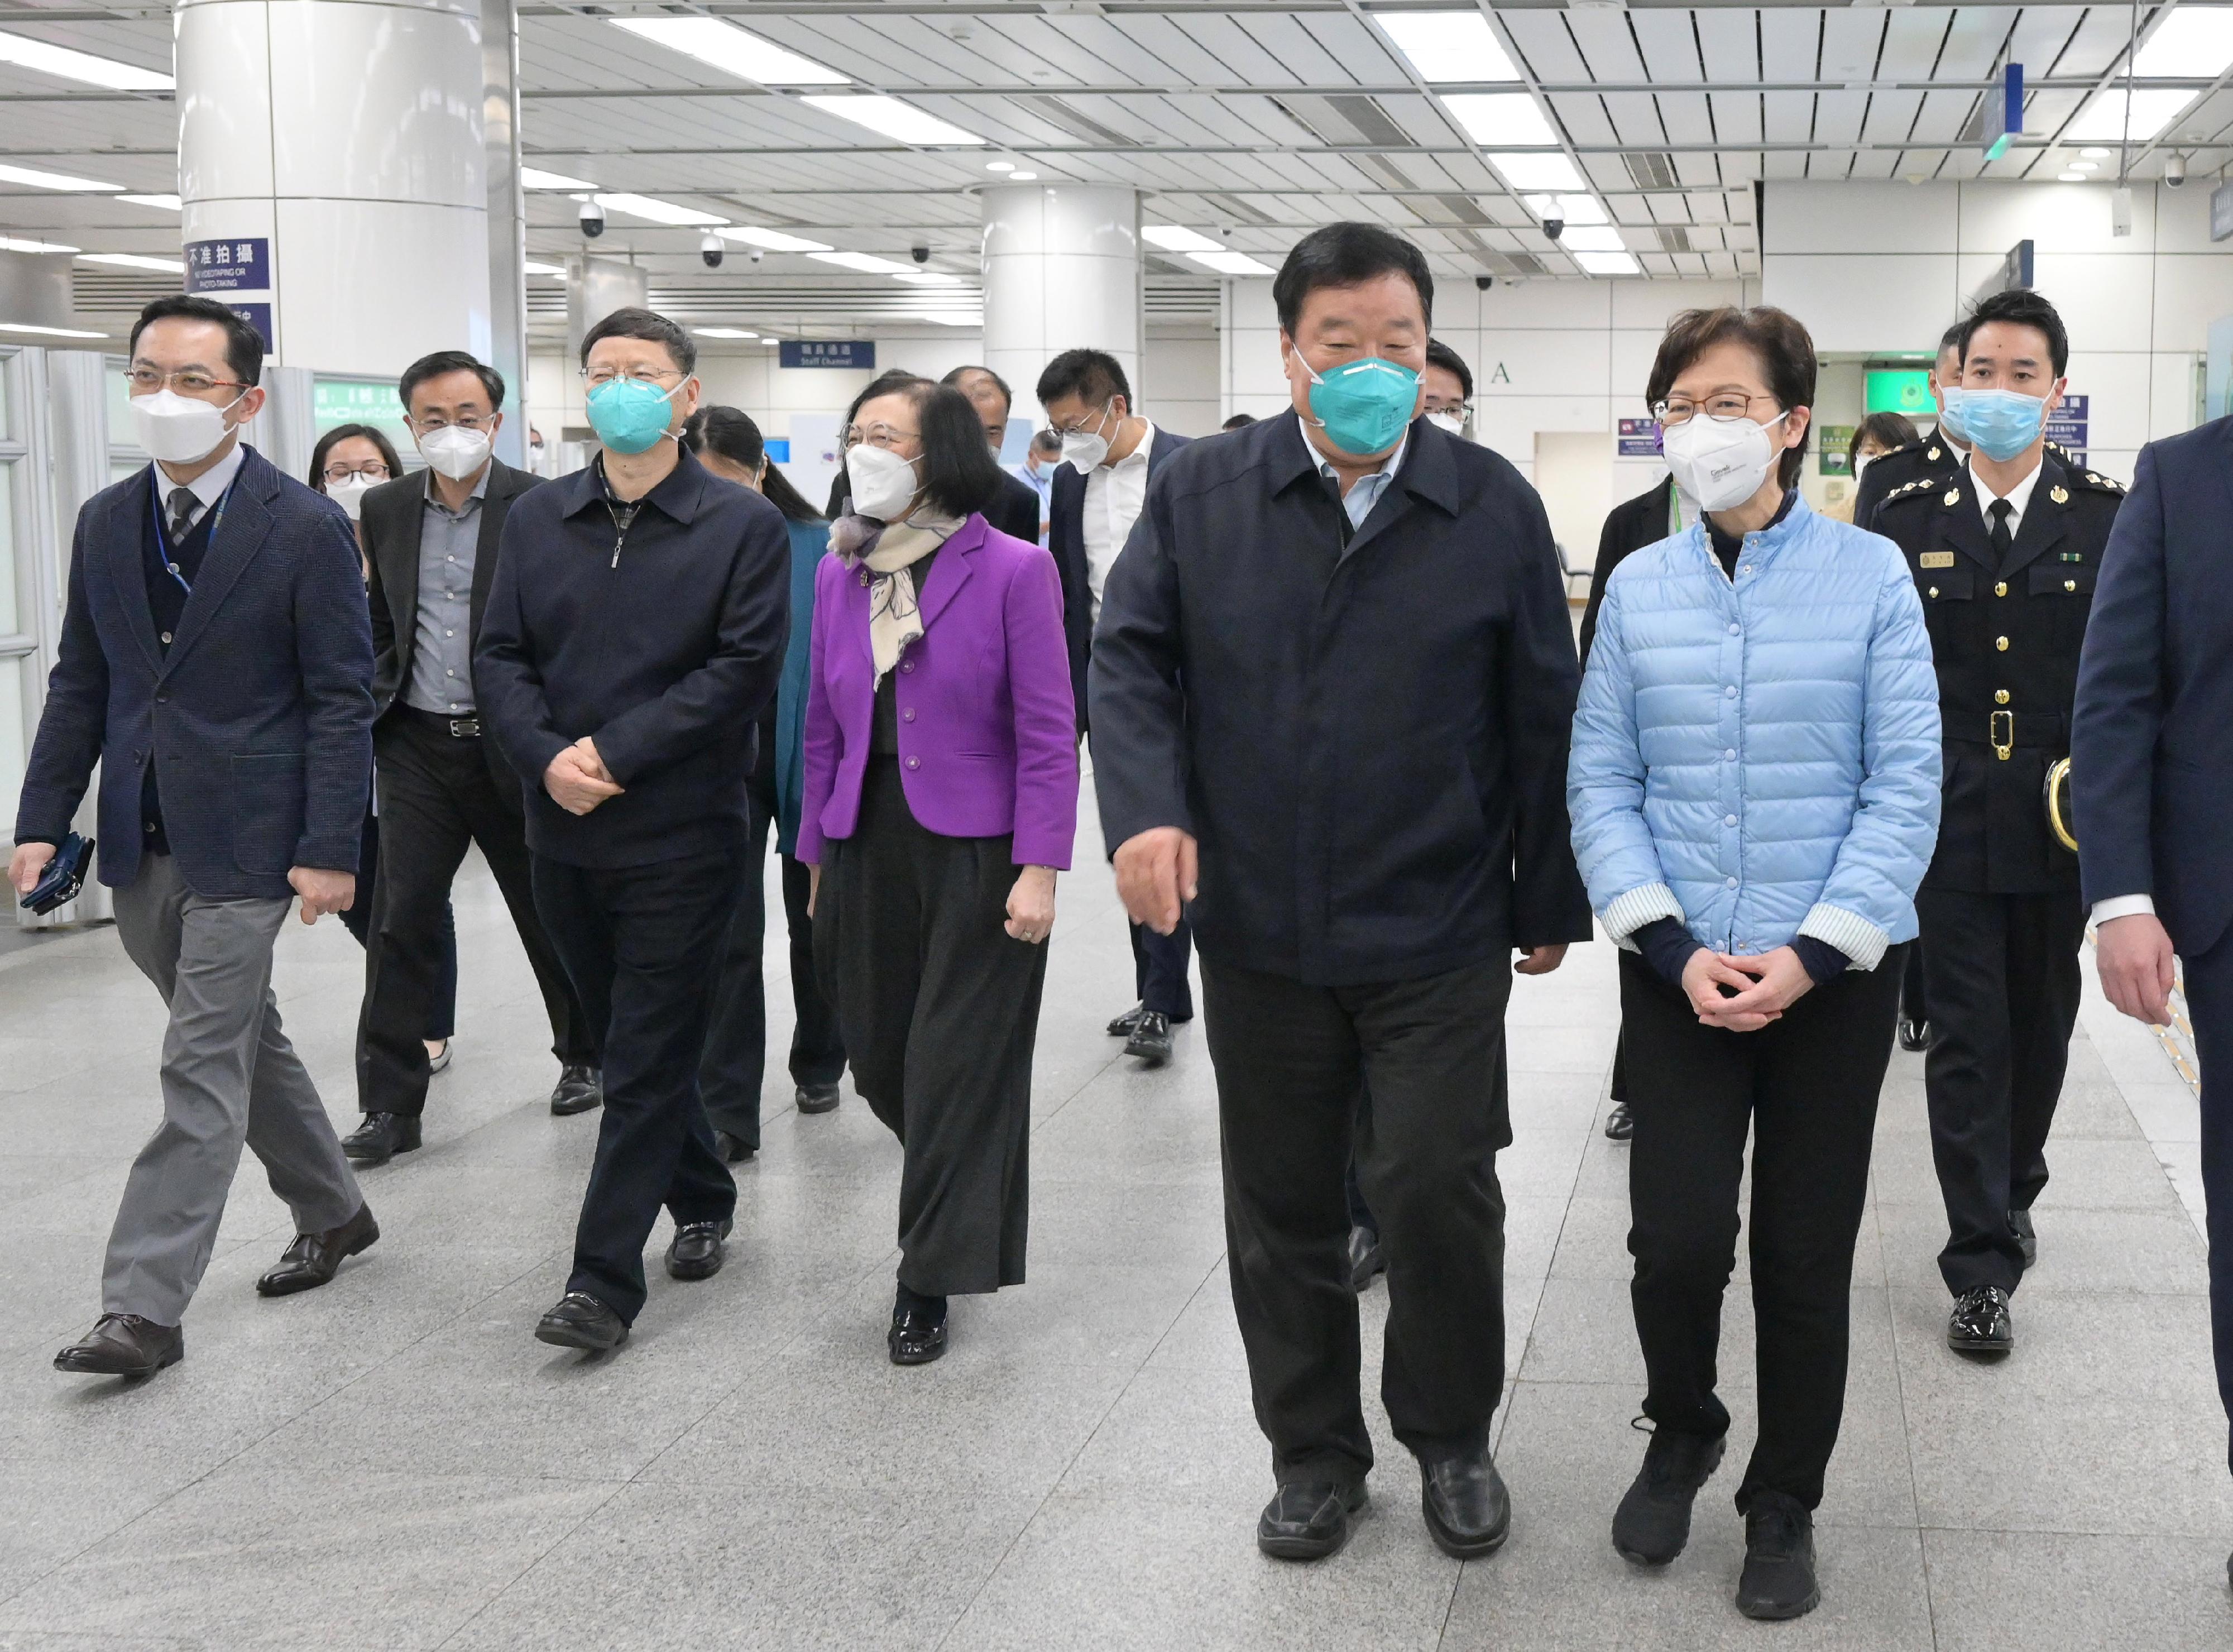 The Chief Executive, Mrs Carrie Lam, today (February 28) welcomed the arrival of Mainland experts at the Shenzhen Bay Control Point. Photo shows Mrs Lam (second right) talking with the Head of the National Health Commission's COVID-19 leading task force, Professor Liang Wannian (third right). Looking on is the Secretary for Food and Health, Professor Sophia Chan (third left).